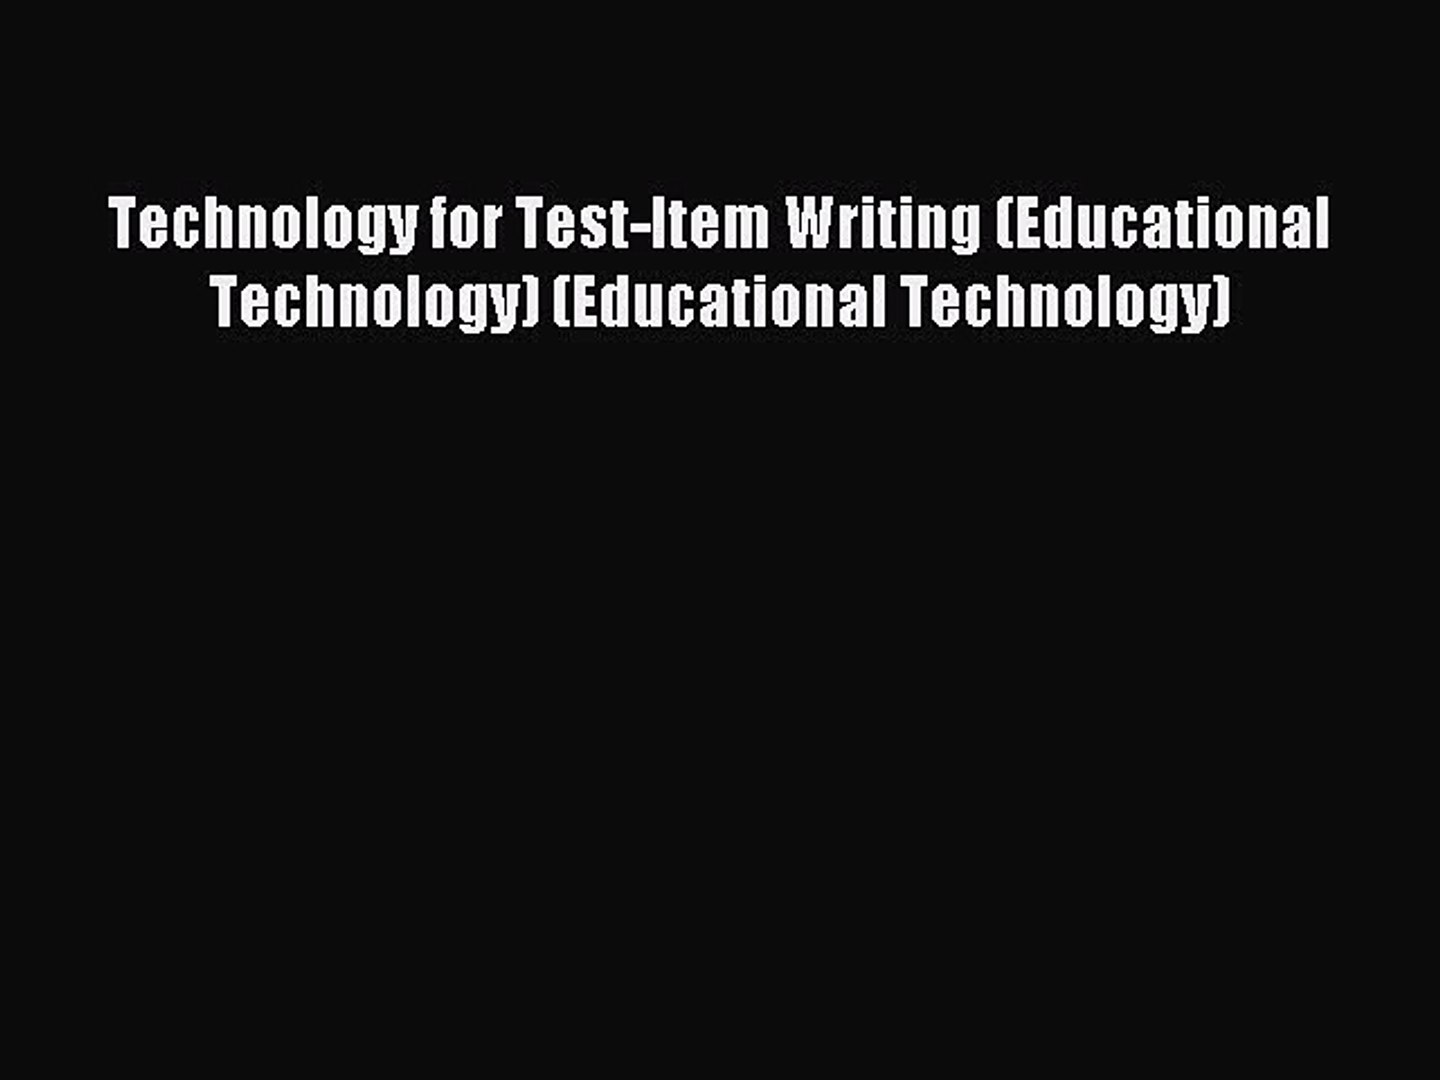 Download Technology for Test-Item Writing (Educational Technology) (Educational Technology)